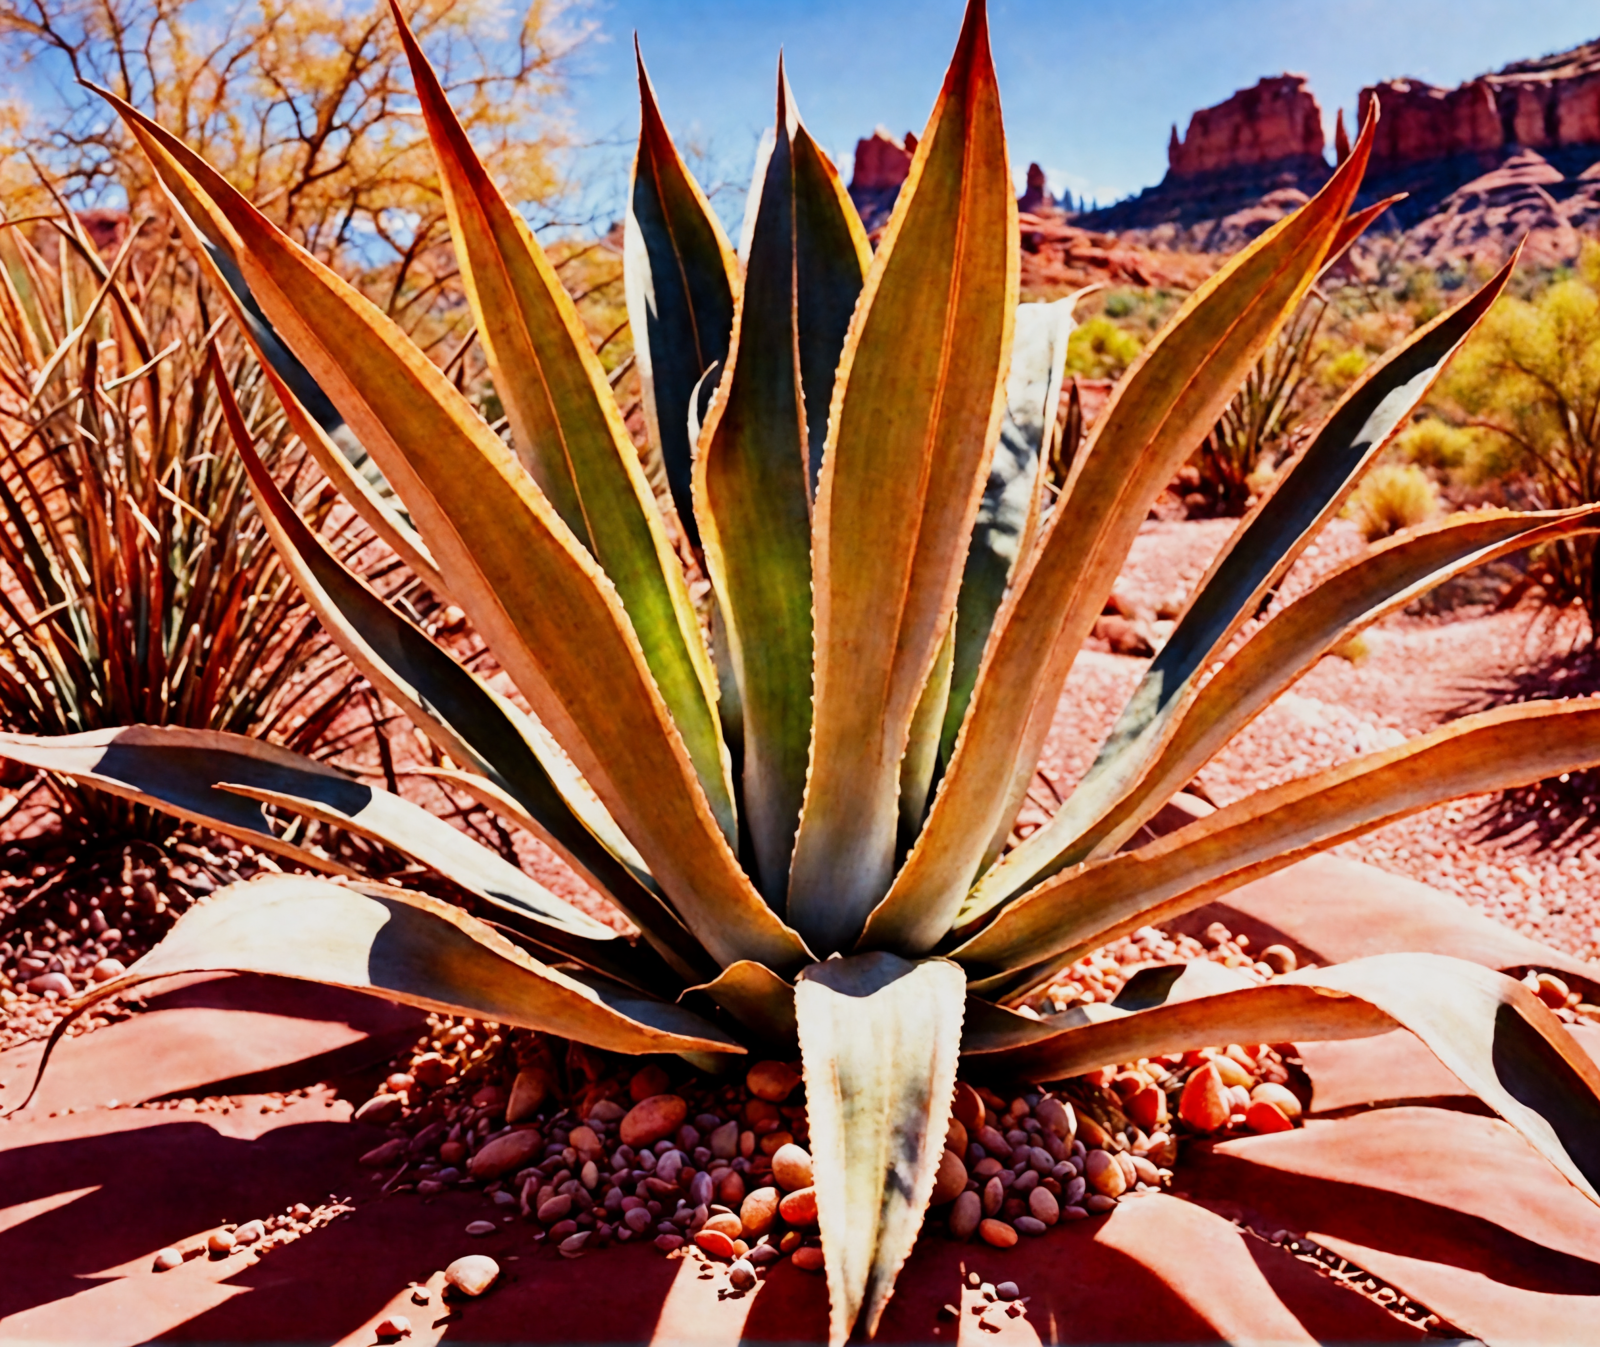 Agave americana with thick leaves in Arizona desert, red rocks behind, under bright sunlight.